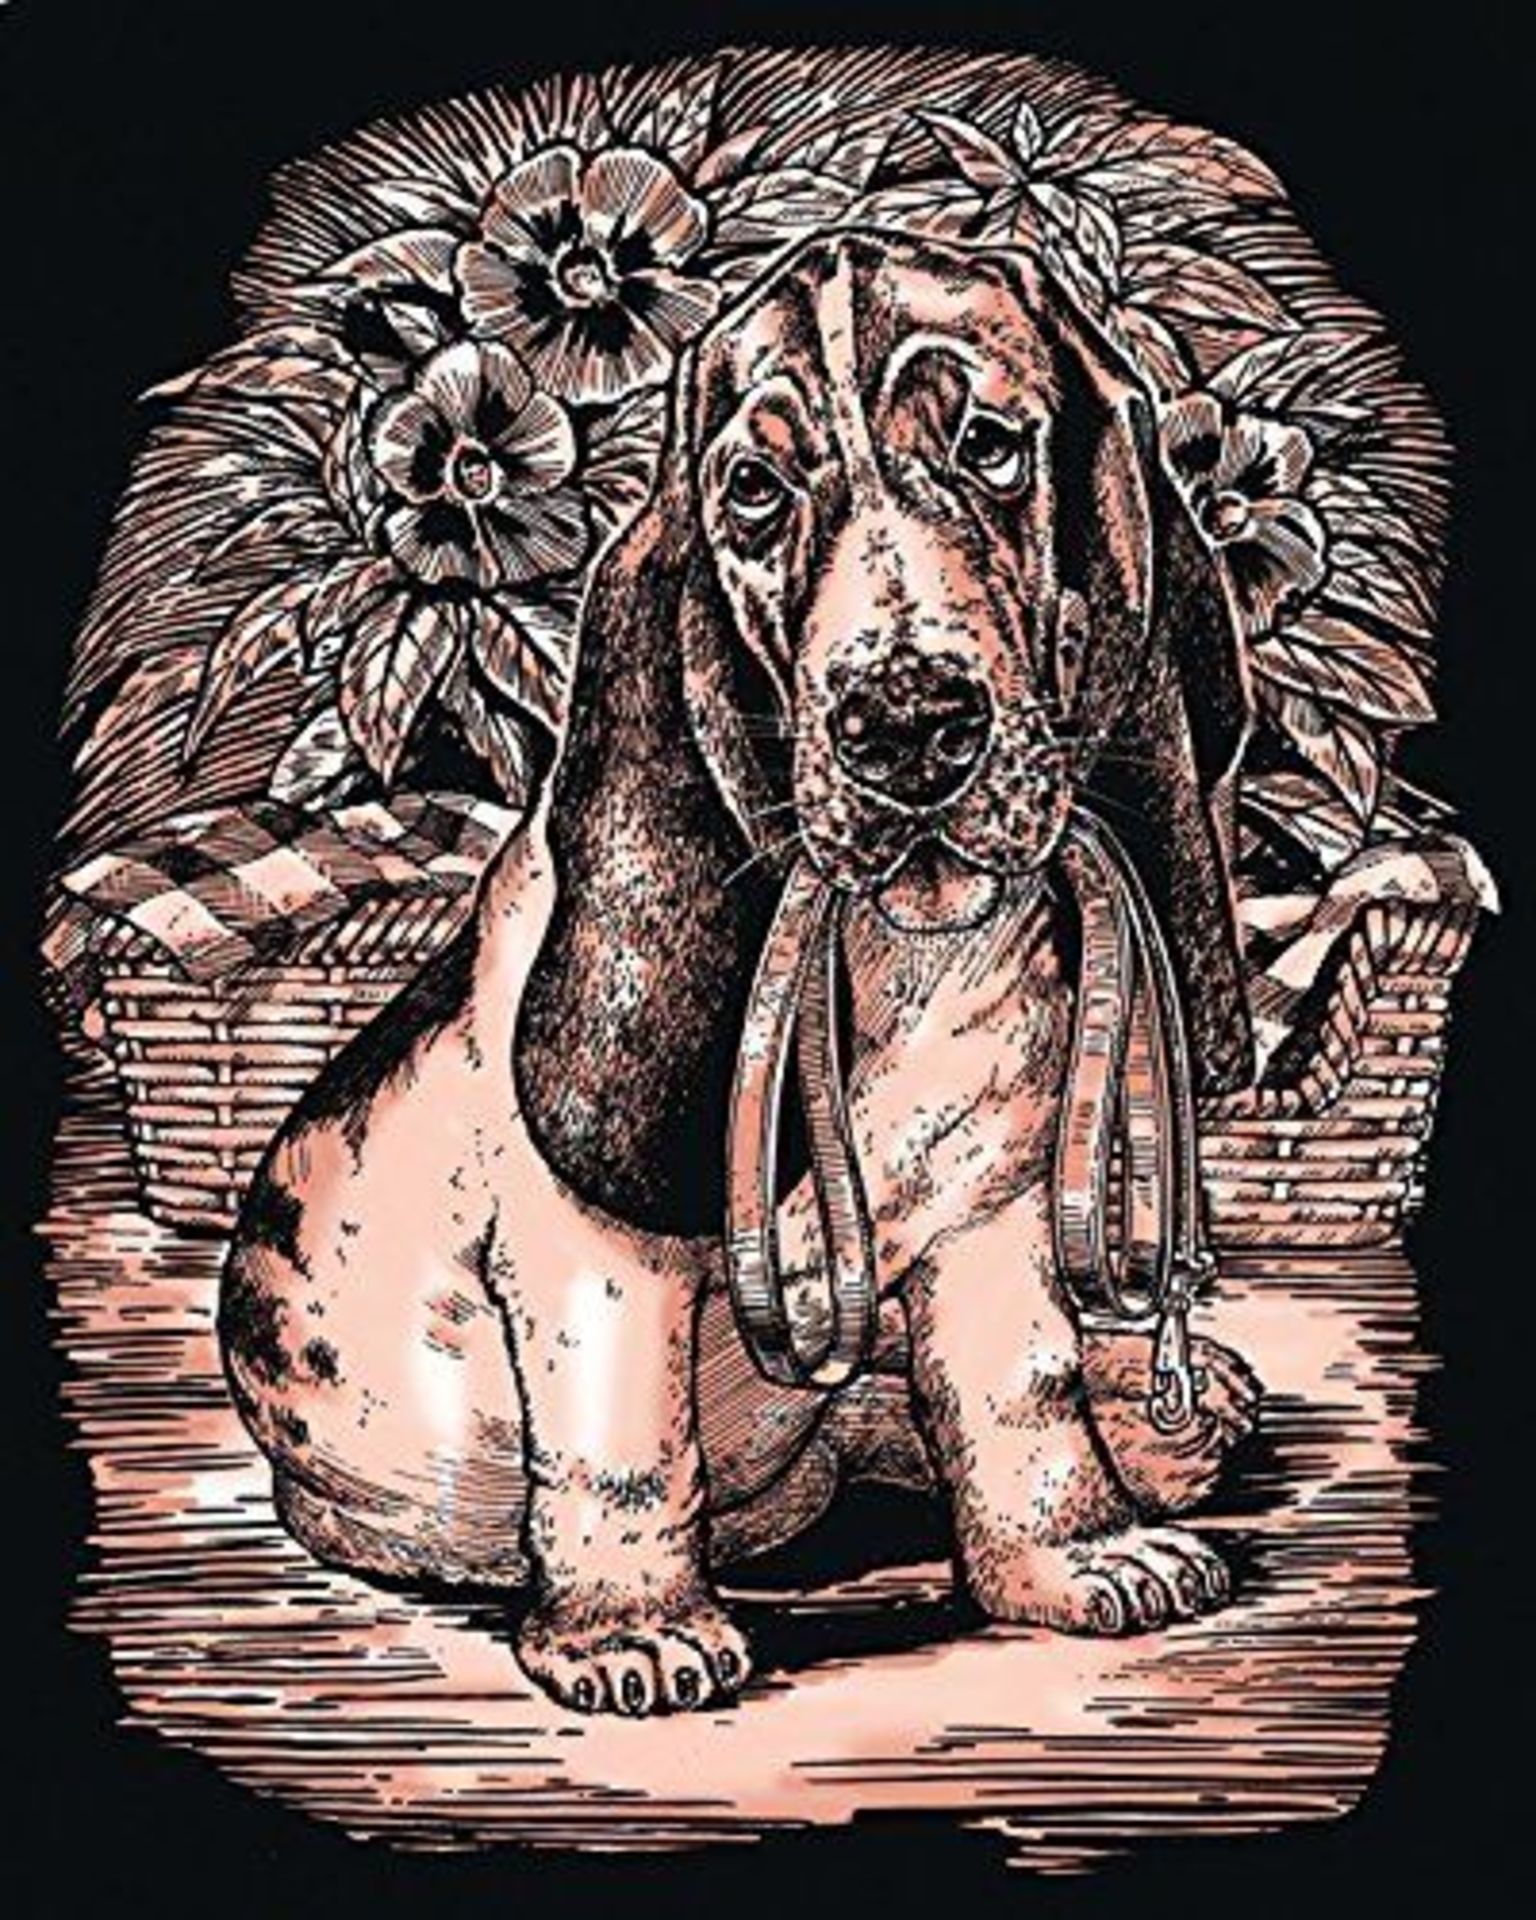 V Brand New A Lot Of Four Copper Art Foils - Two Basset Hounds-One Gorilla & One Elephant ISP £22.46 - Image 2 of 3